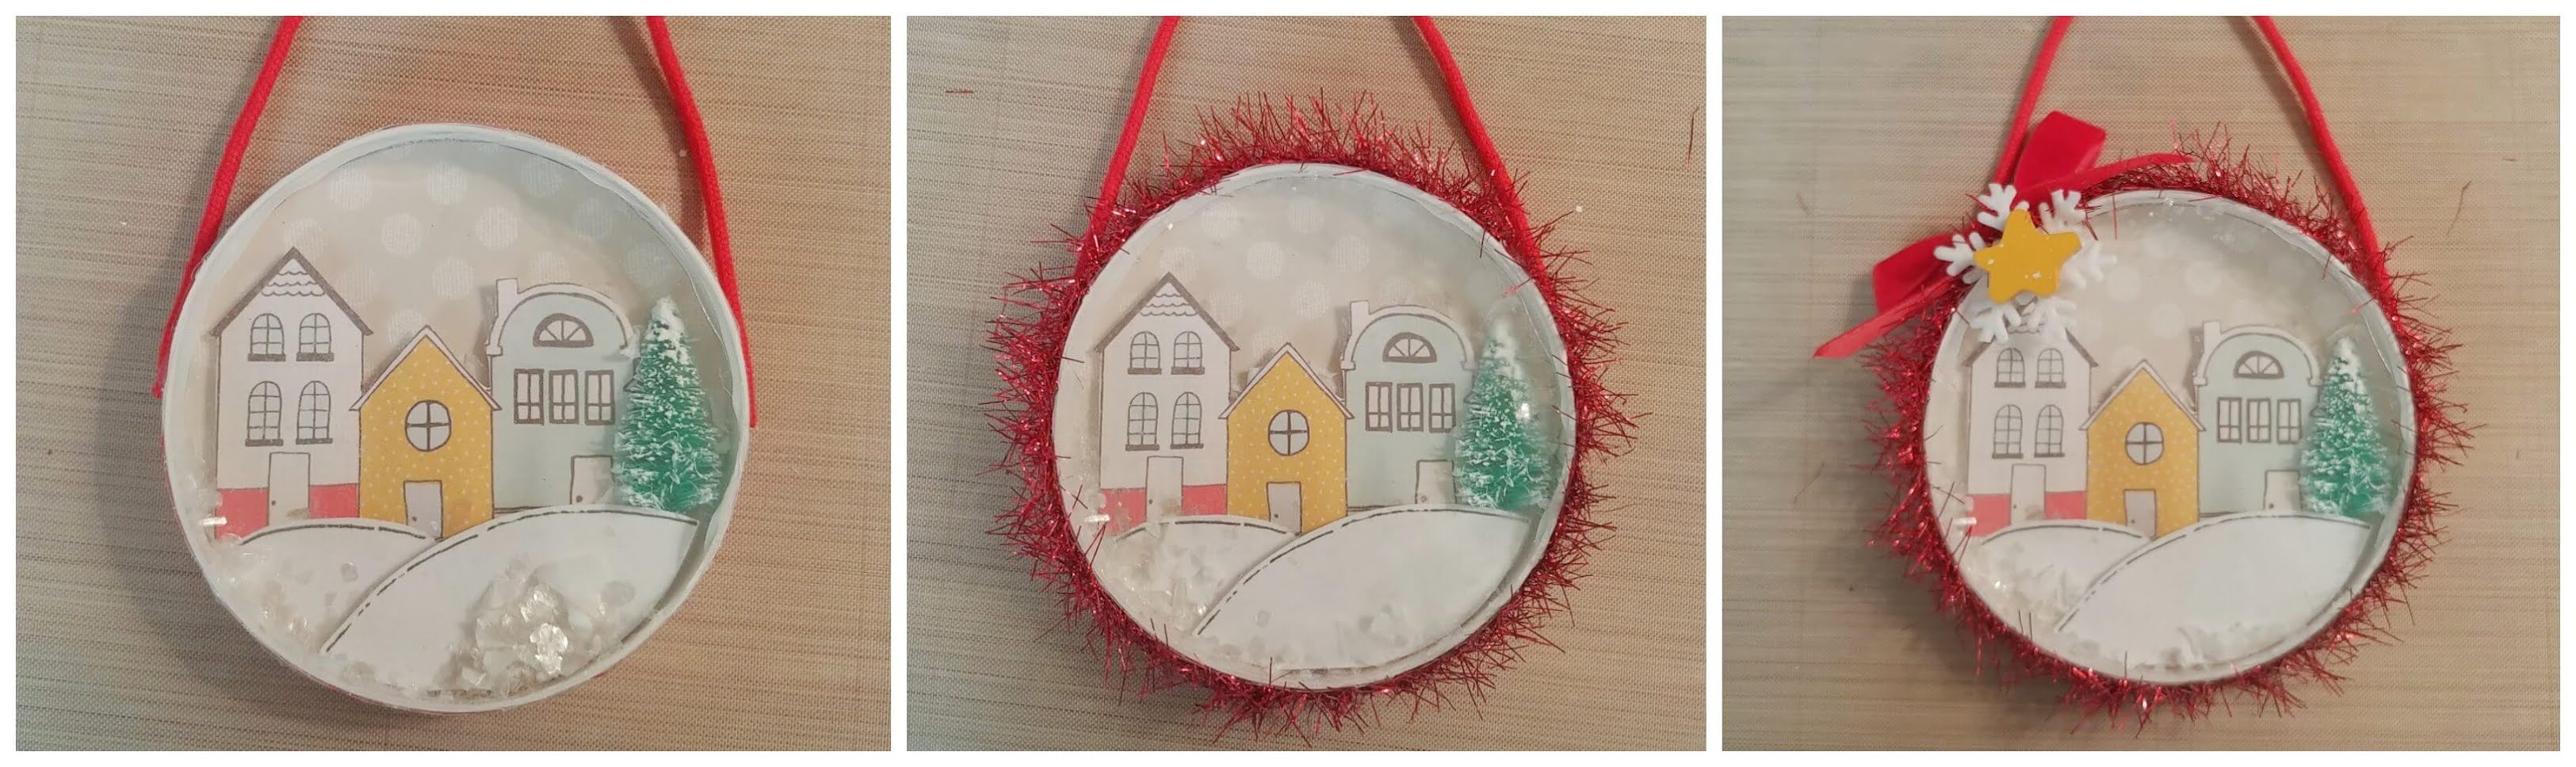 Snow Globe Ornaments From Recycled Ice Cream Lids!